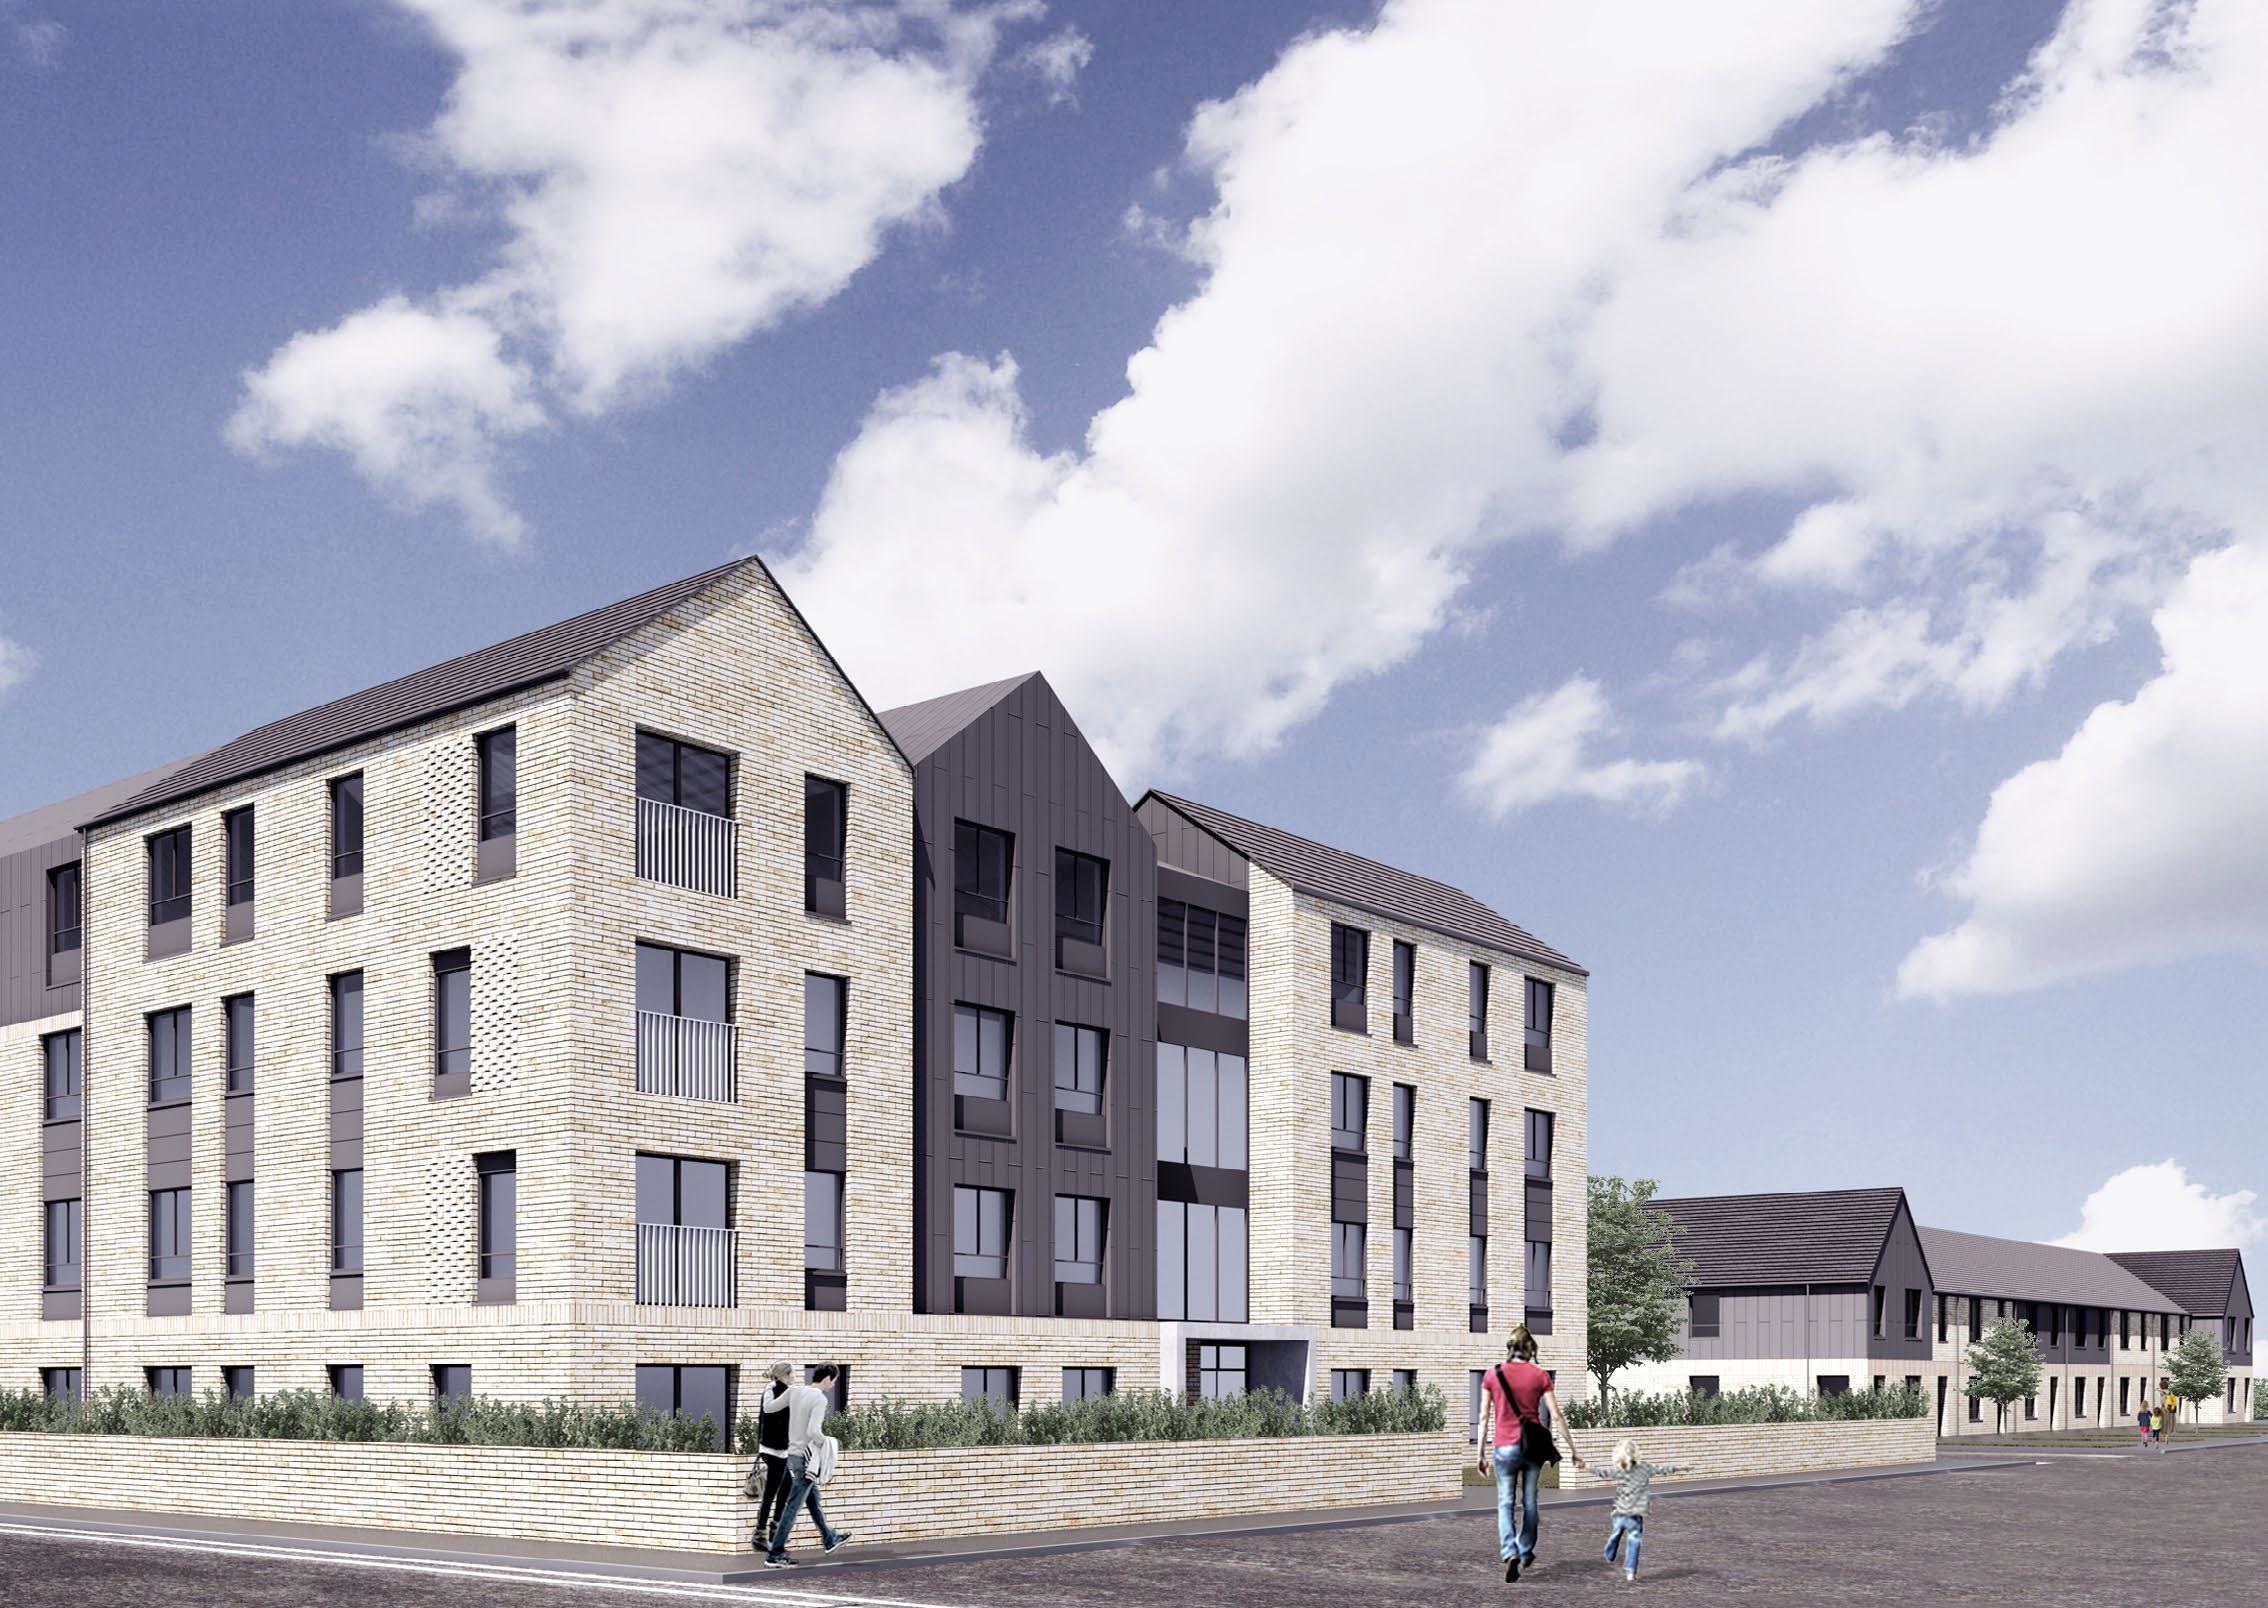 Works starts on new affordable homes at Tom Johnston House site